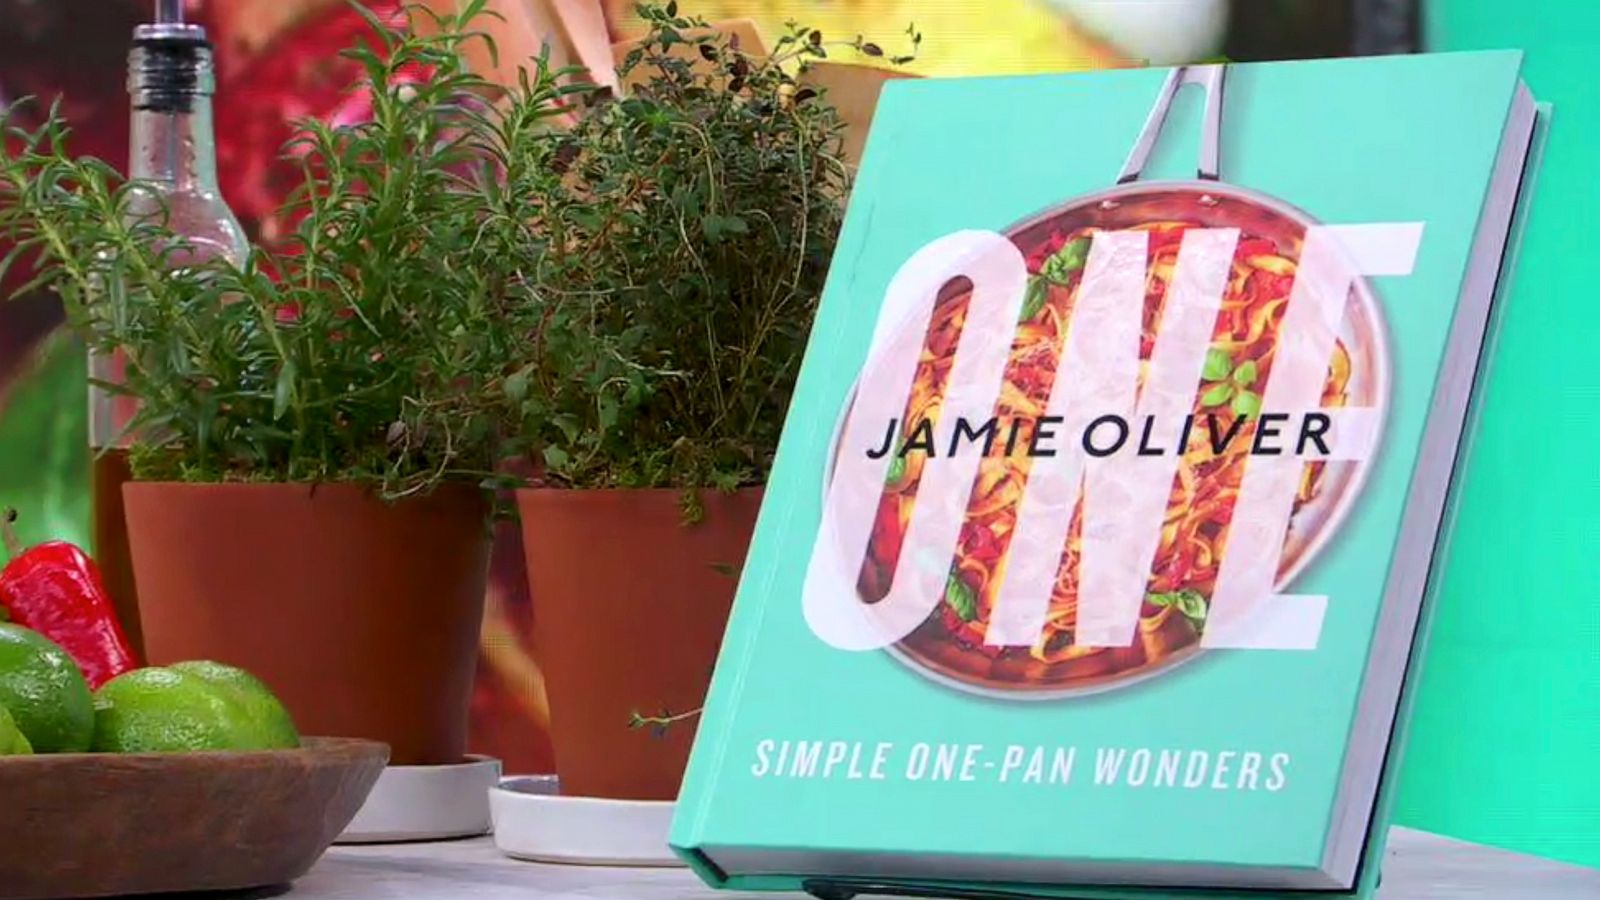 Chef Jamie Oliver shares smoked pancetta and bean pasta recipe from  cookbook 'One: Simple One-Pan Wonders' - Good Morning America